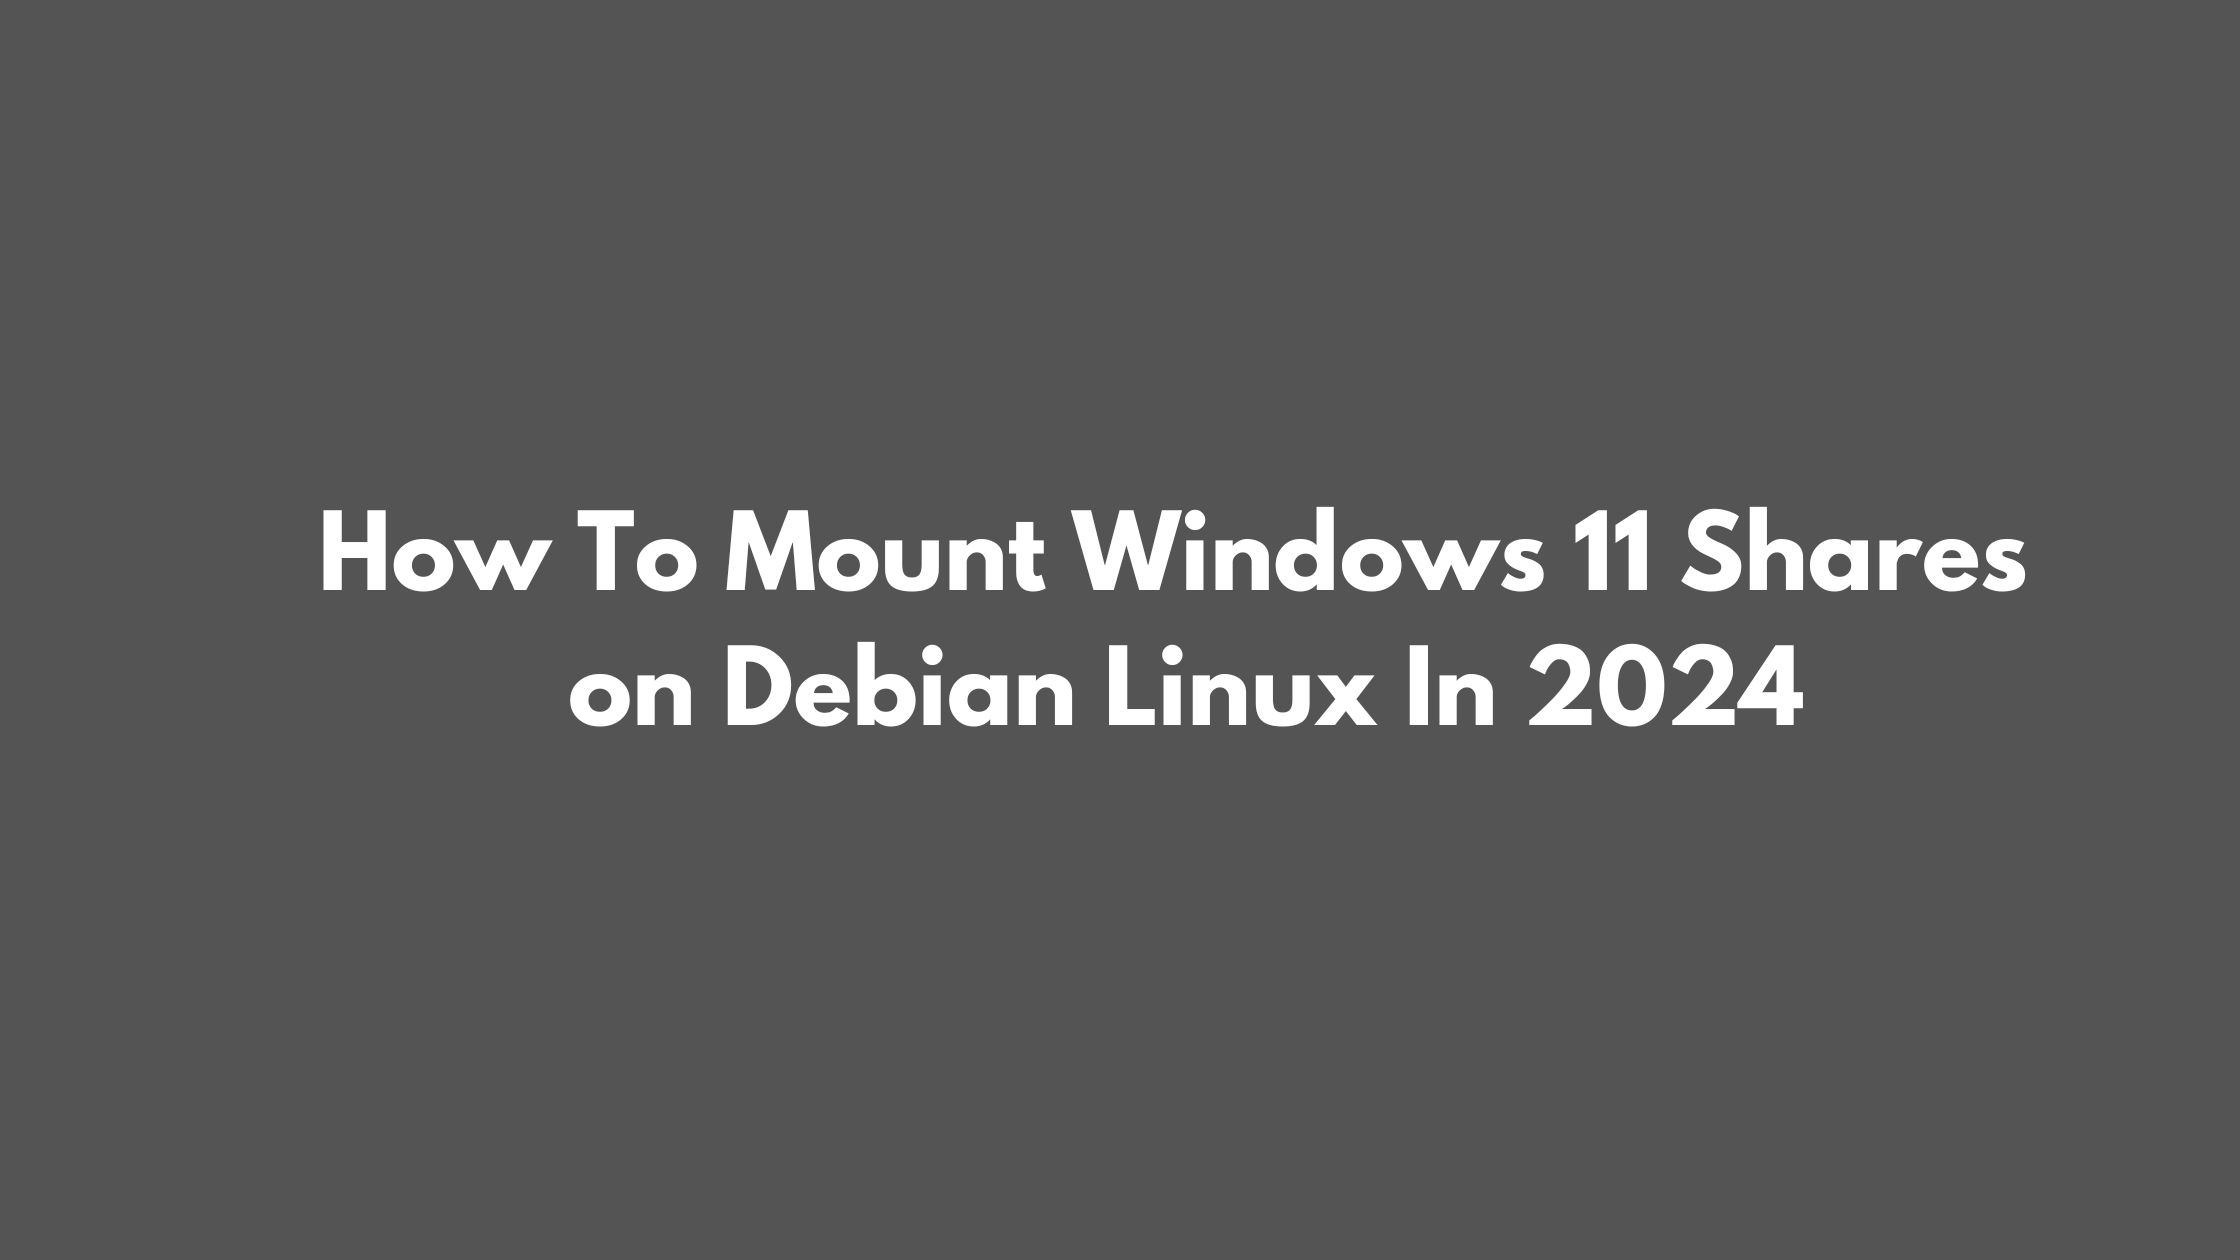 How To Mount Windows 11 Shares on Debian Linux In 2024